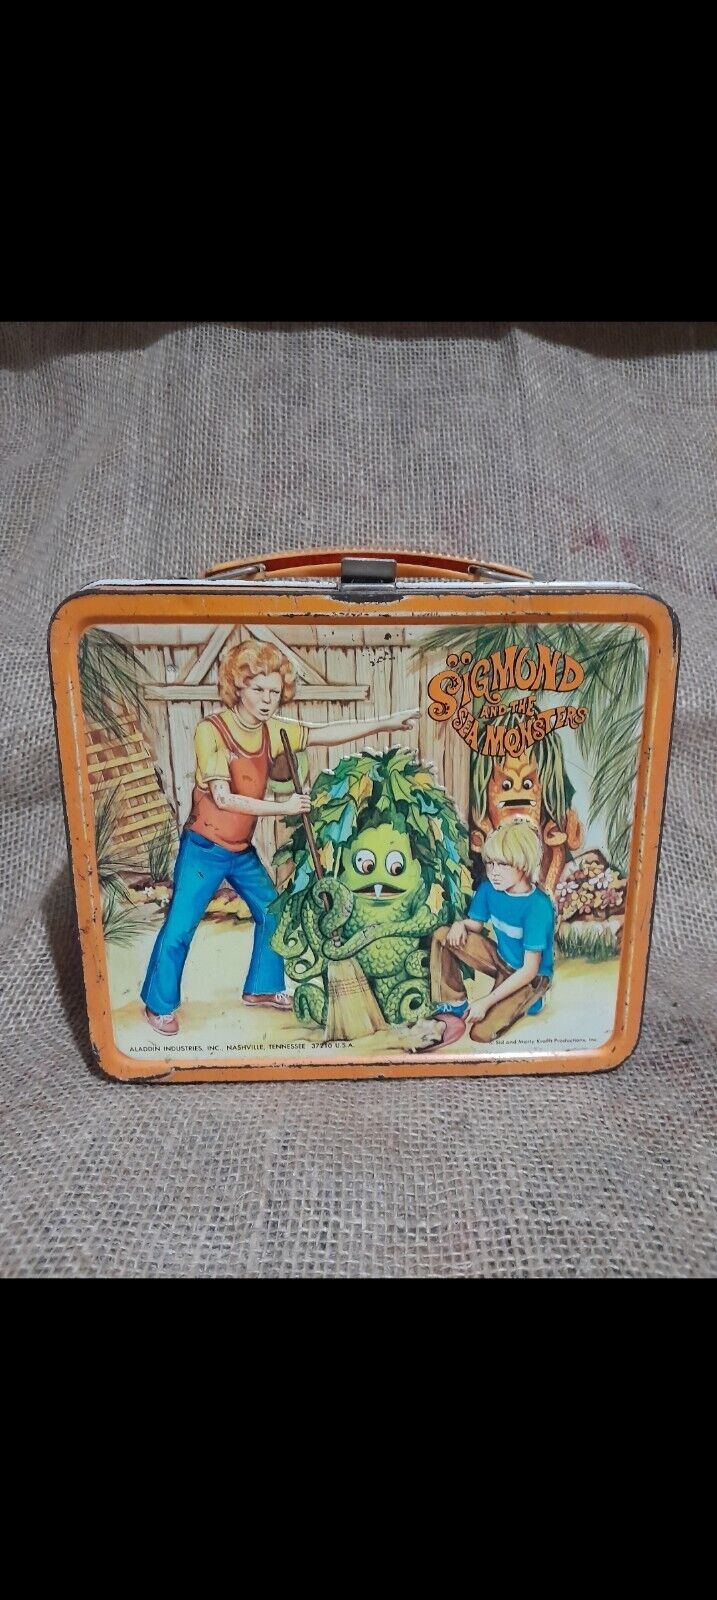 1974 Aladdin Sigmund And The Sea Monsters Metal Lunchbox Sid & Marty Krofft Rare